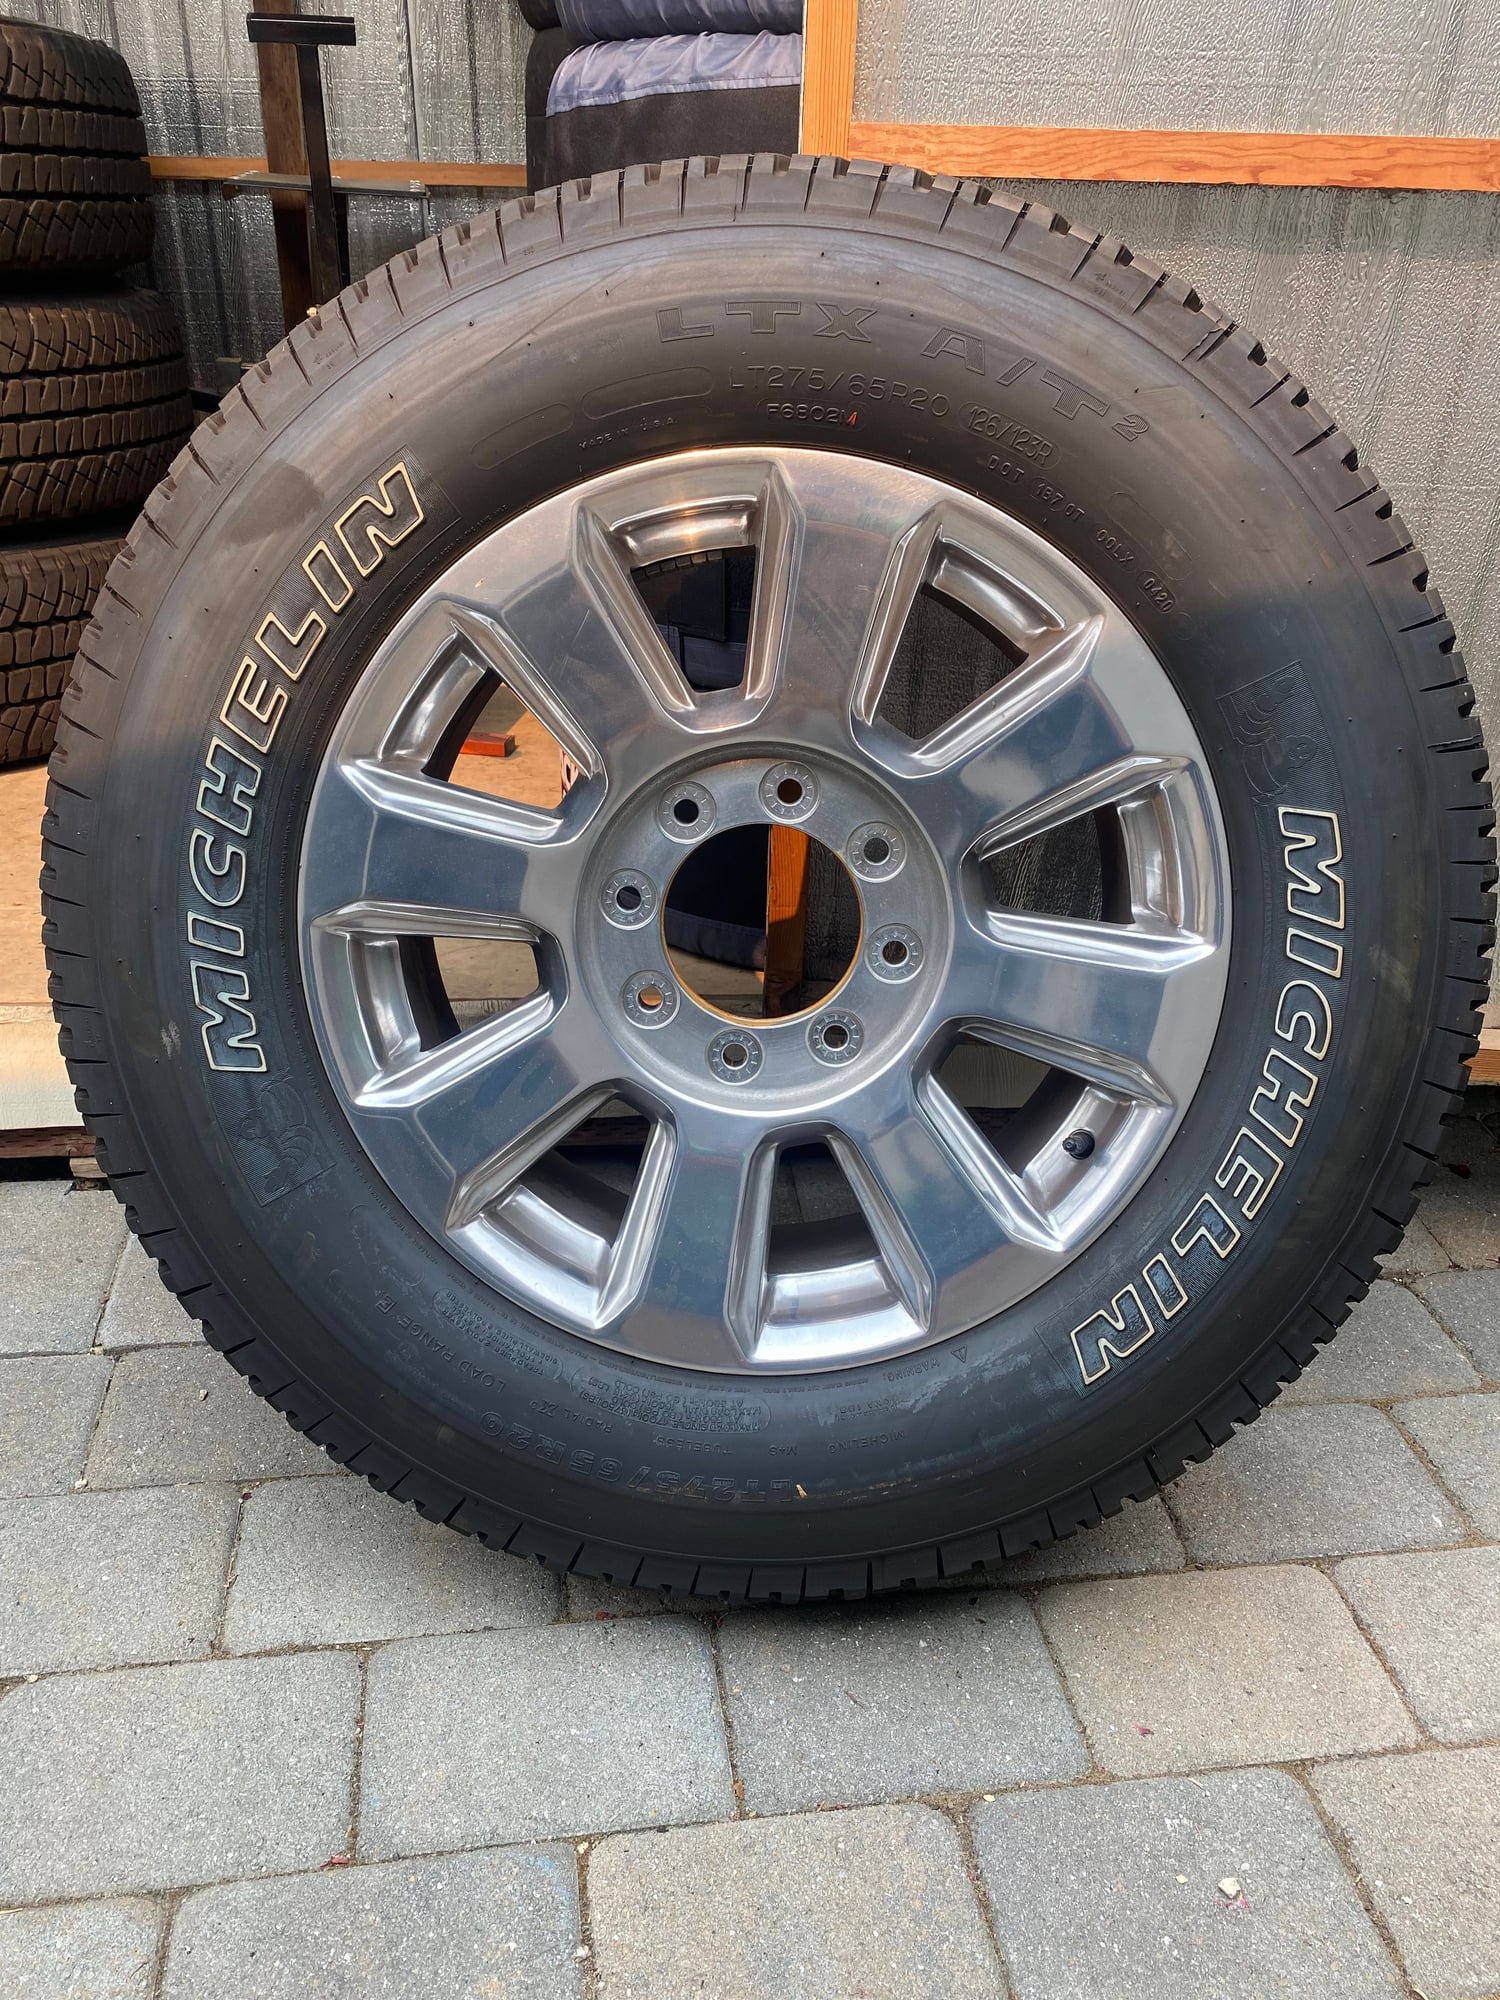 Wheels and Tires/Axles - 2020 Platinum F350 wheels and Tires - 20" - Used - 2017 to 2021 Ford F-350 Super Duty - 2017 to 2021 Ford F-250 Super Duty - Woodside, CA 94062, United States